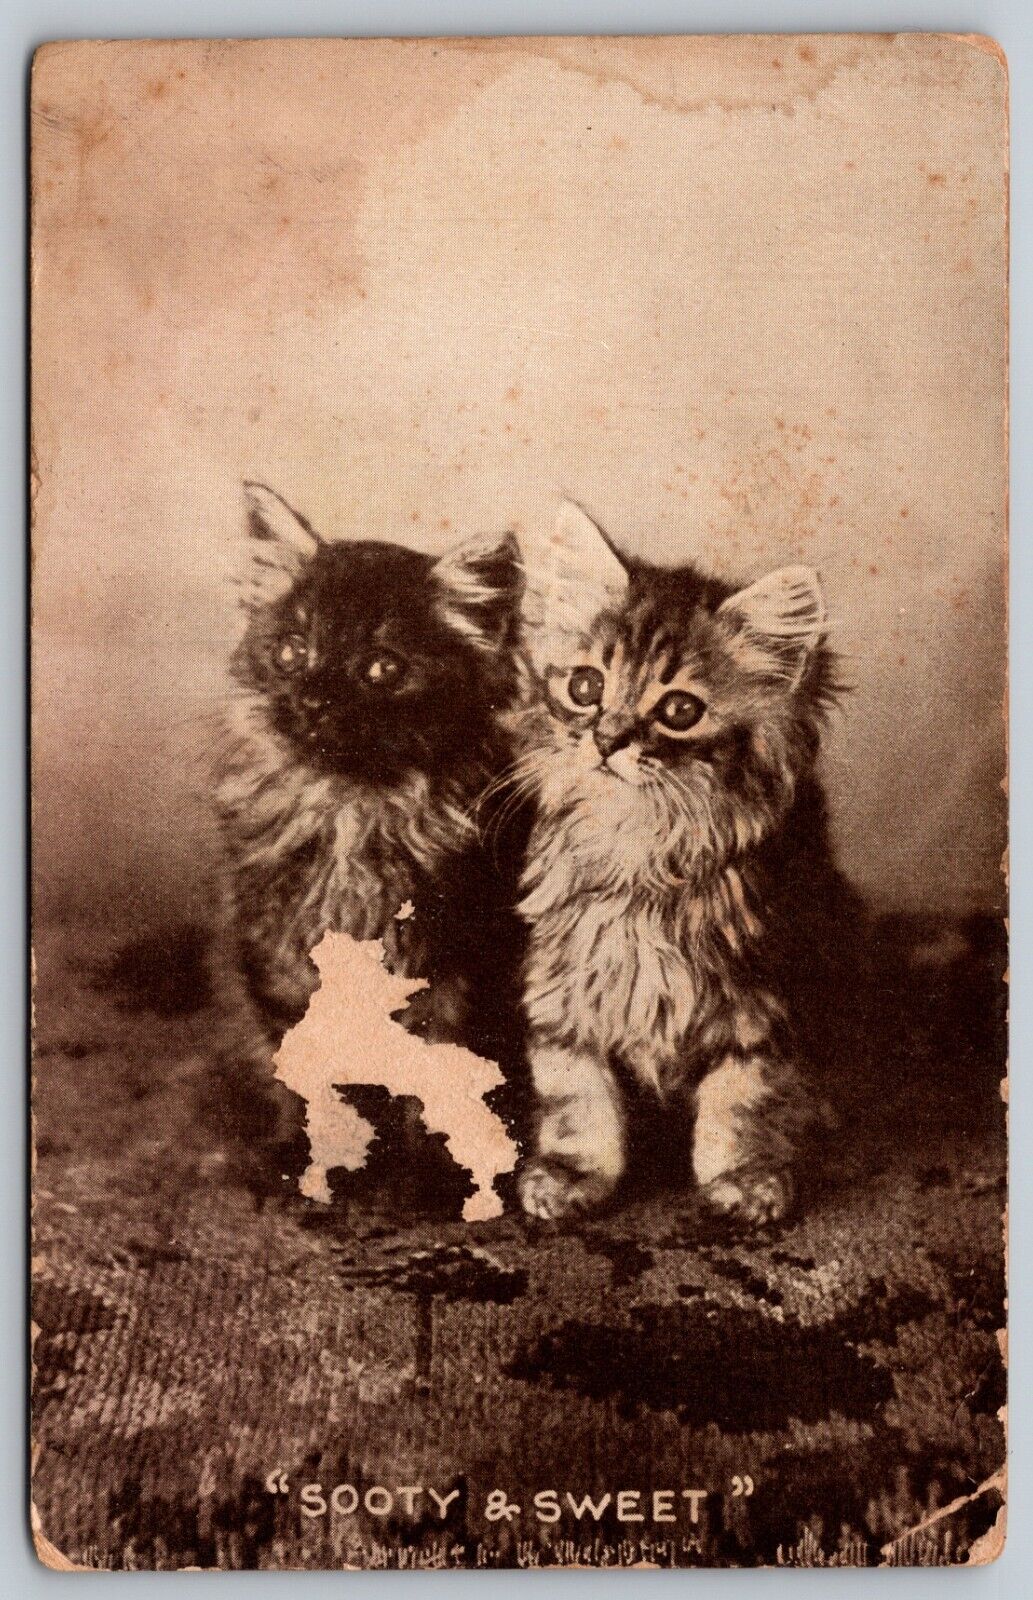 Sooty & Sweet Saxton Pharmacy Vintage Postcard 1910 Cats Kittens Germany